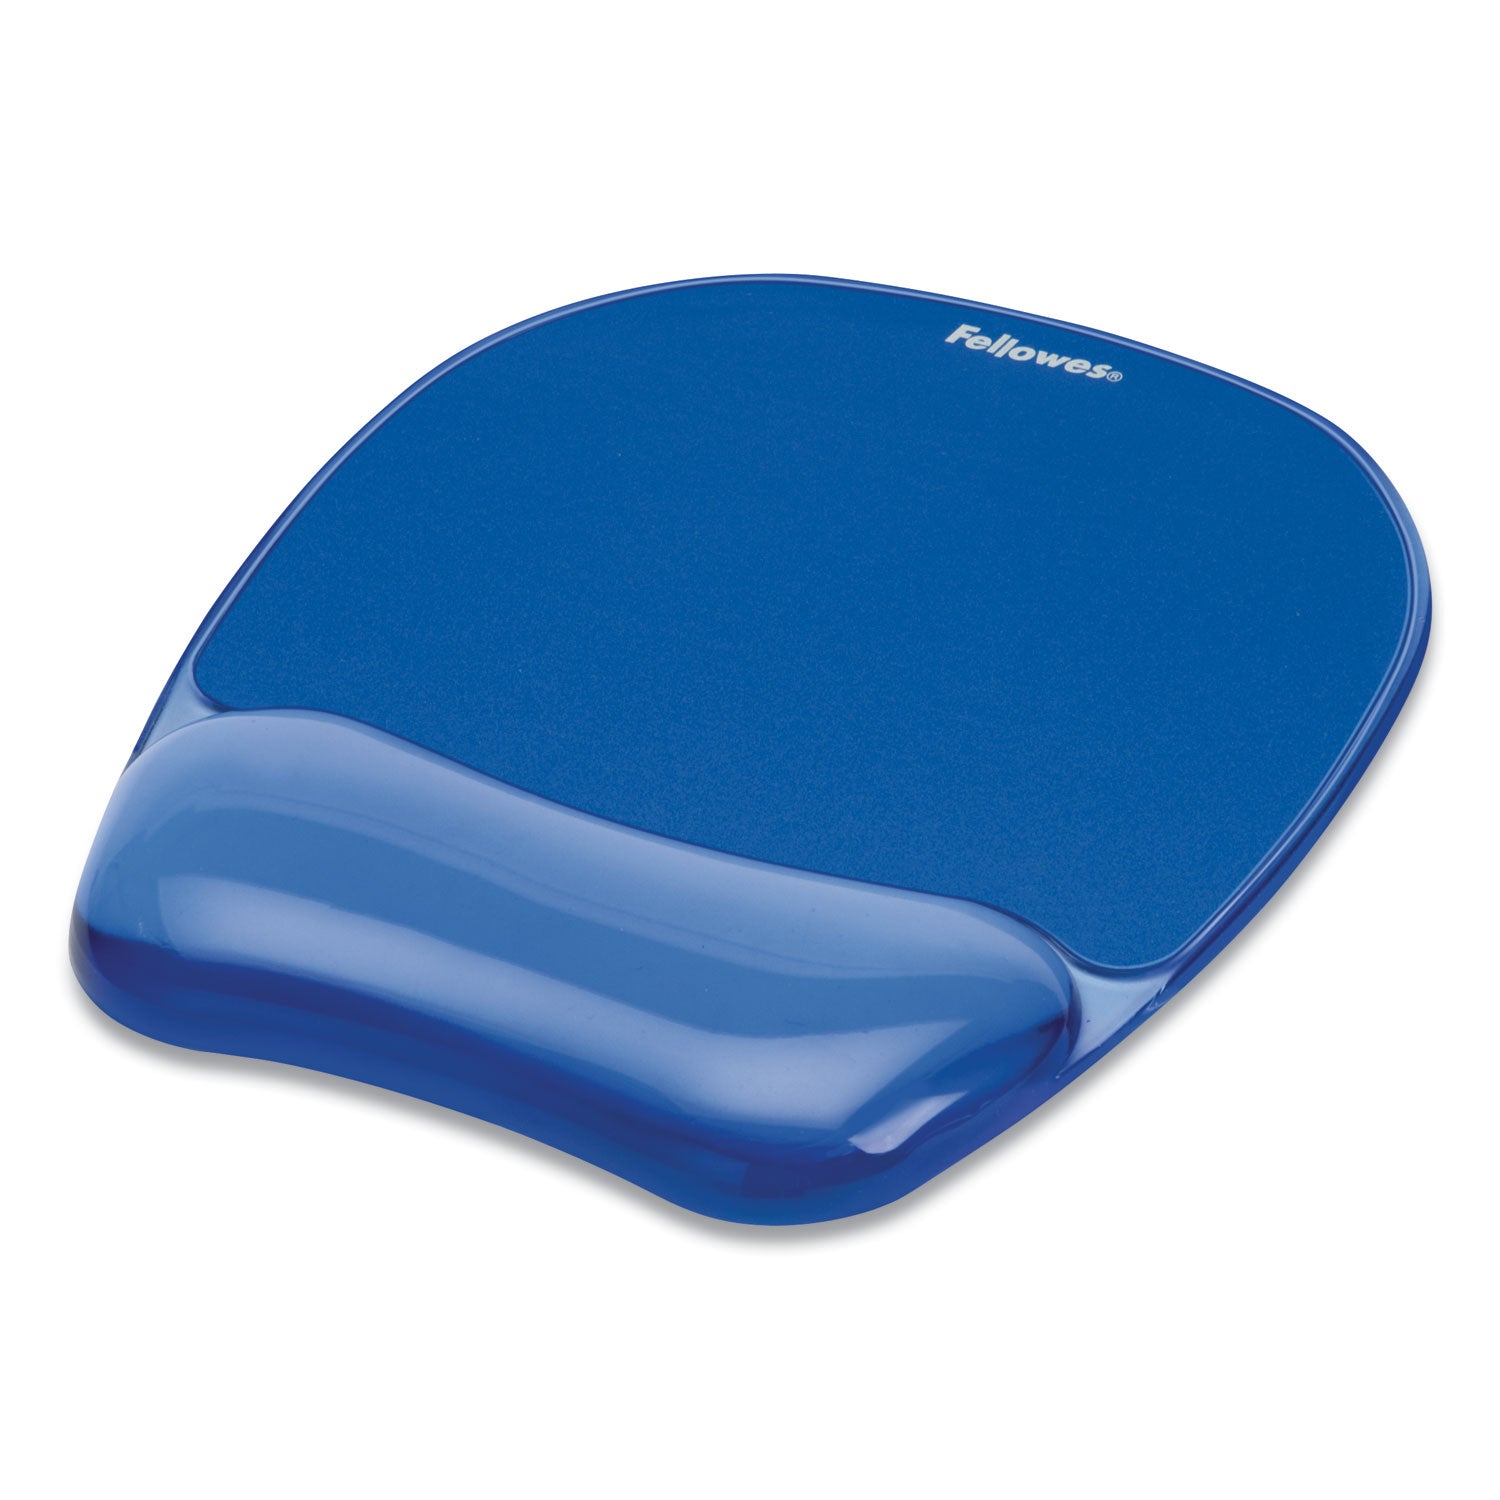 Gel Crystals Mouse Pad with Wrist Rest, 7.87 x 9.18, Blue - 